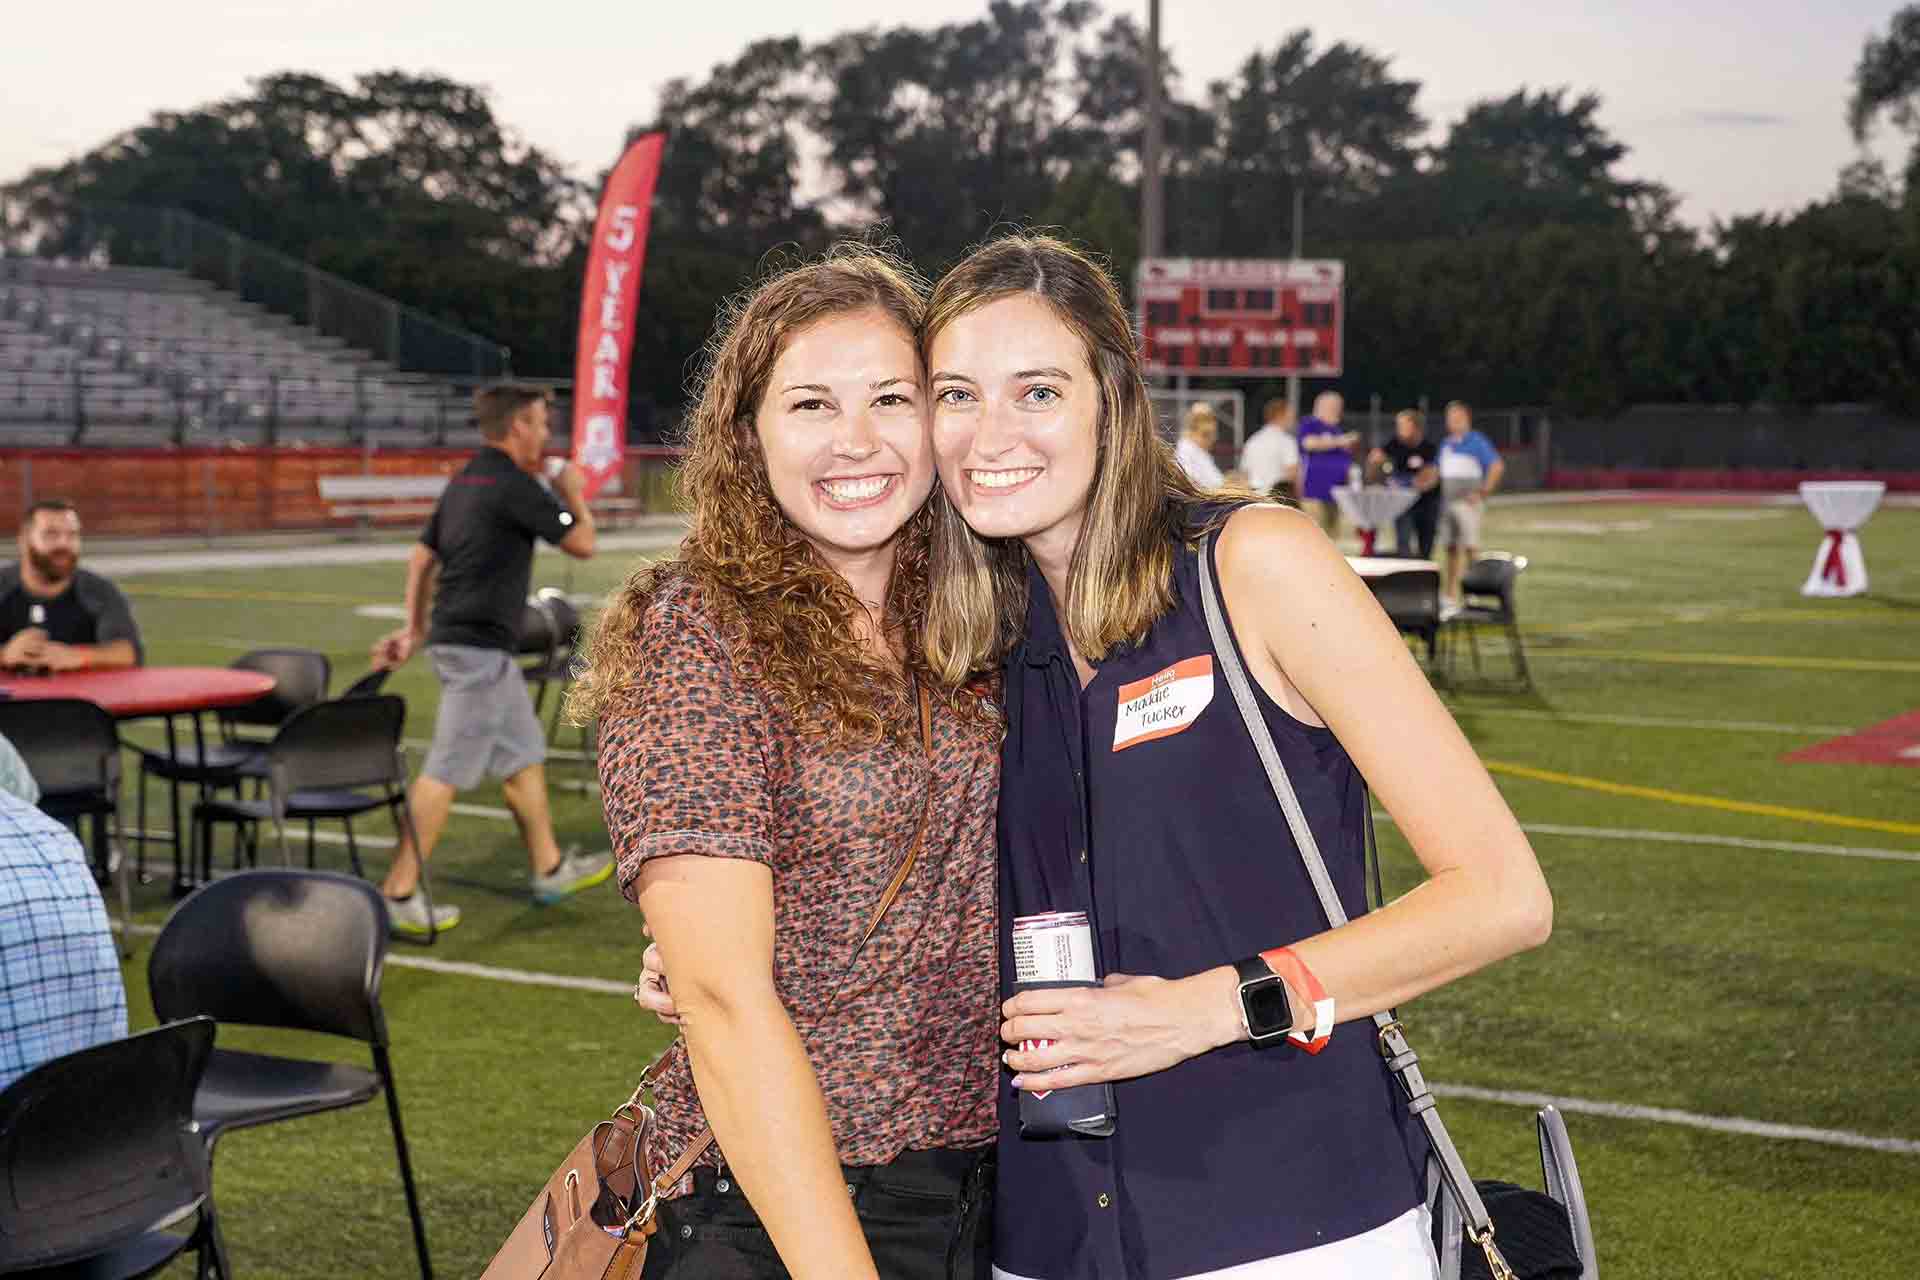 alumni-reunion-2021-maddie-tucker-smiling-with-person